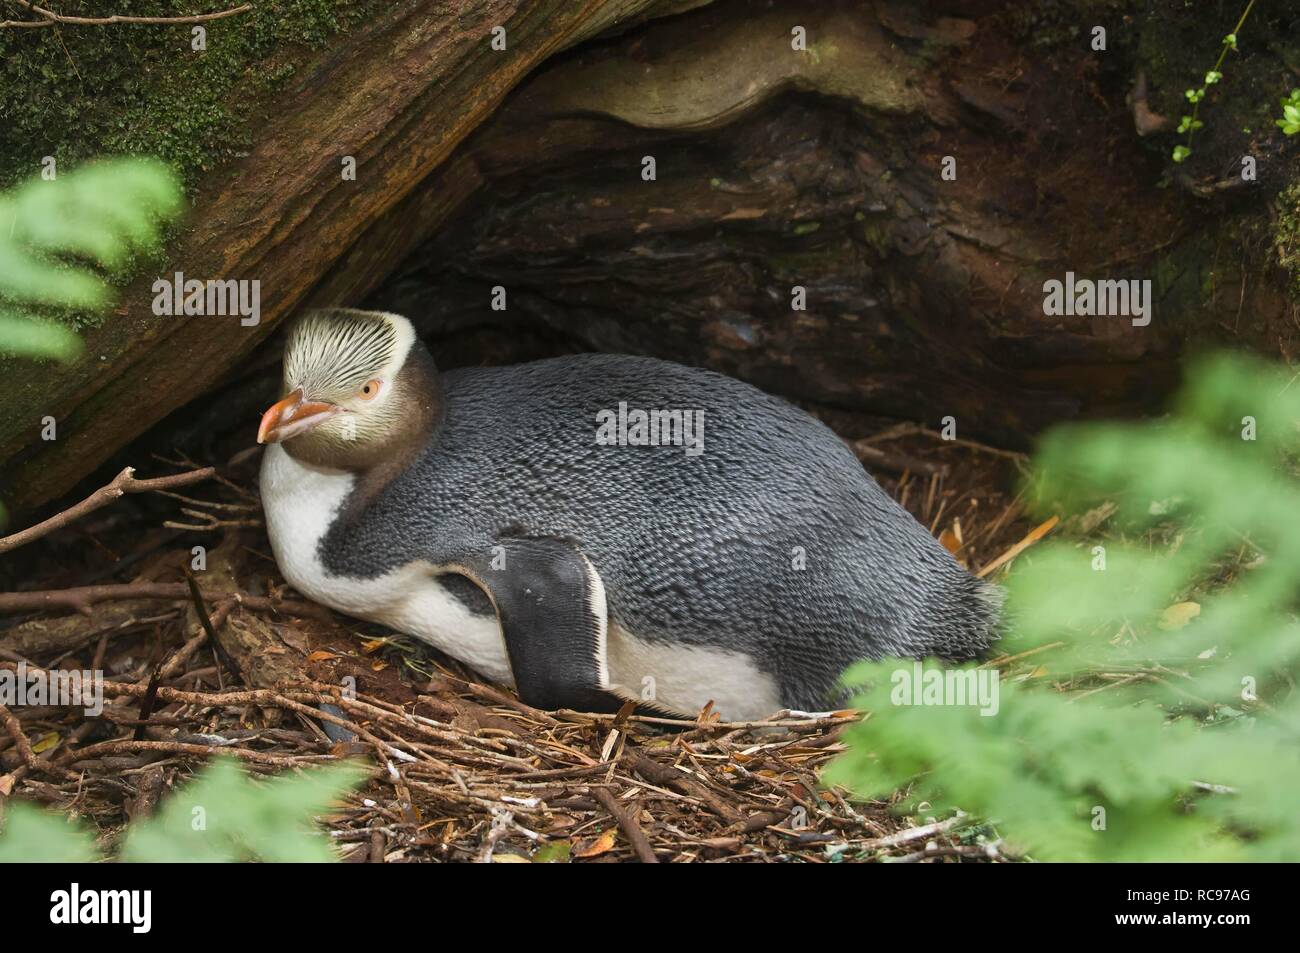 Yellow-eyed penguin (Megadyptes antipodes) nesting under roots in the rata forest, Enderby Island in the Auckland Islands Stock Photo